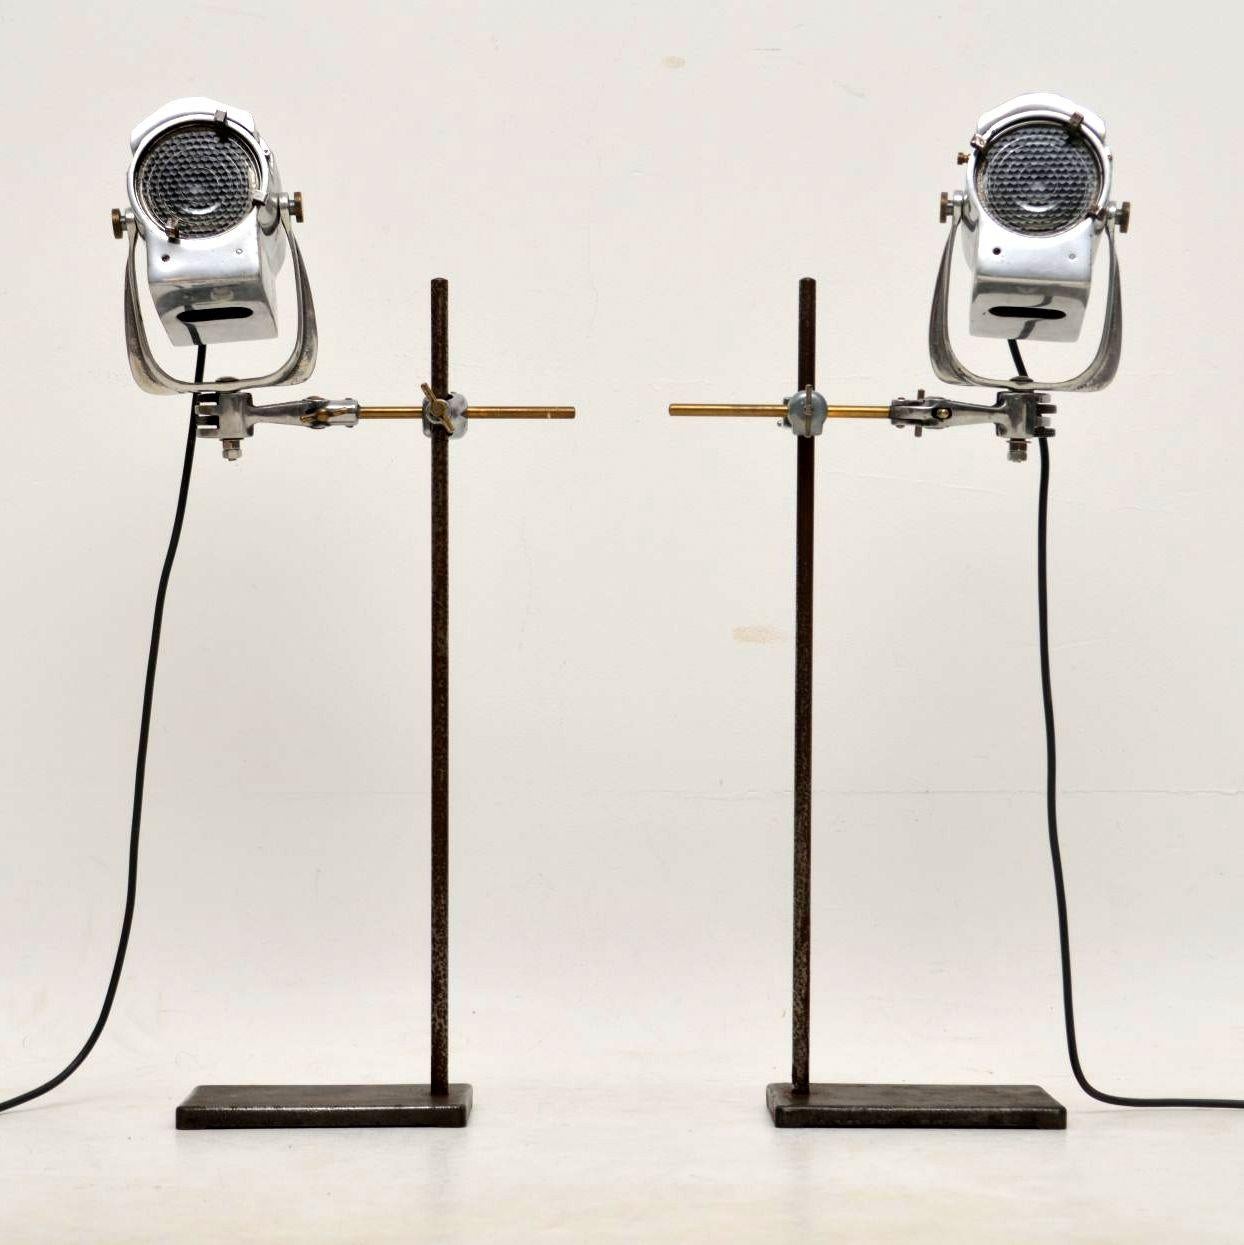 An amazing pair of vintage table lamps / spotlights, these date from circa 1950s-1960s. They were made by Century Lighting Inc in New York, they have been re-wired and are in good working order. The stands were probably added later but they are also